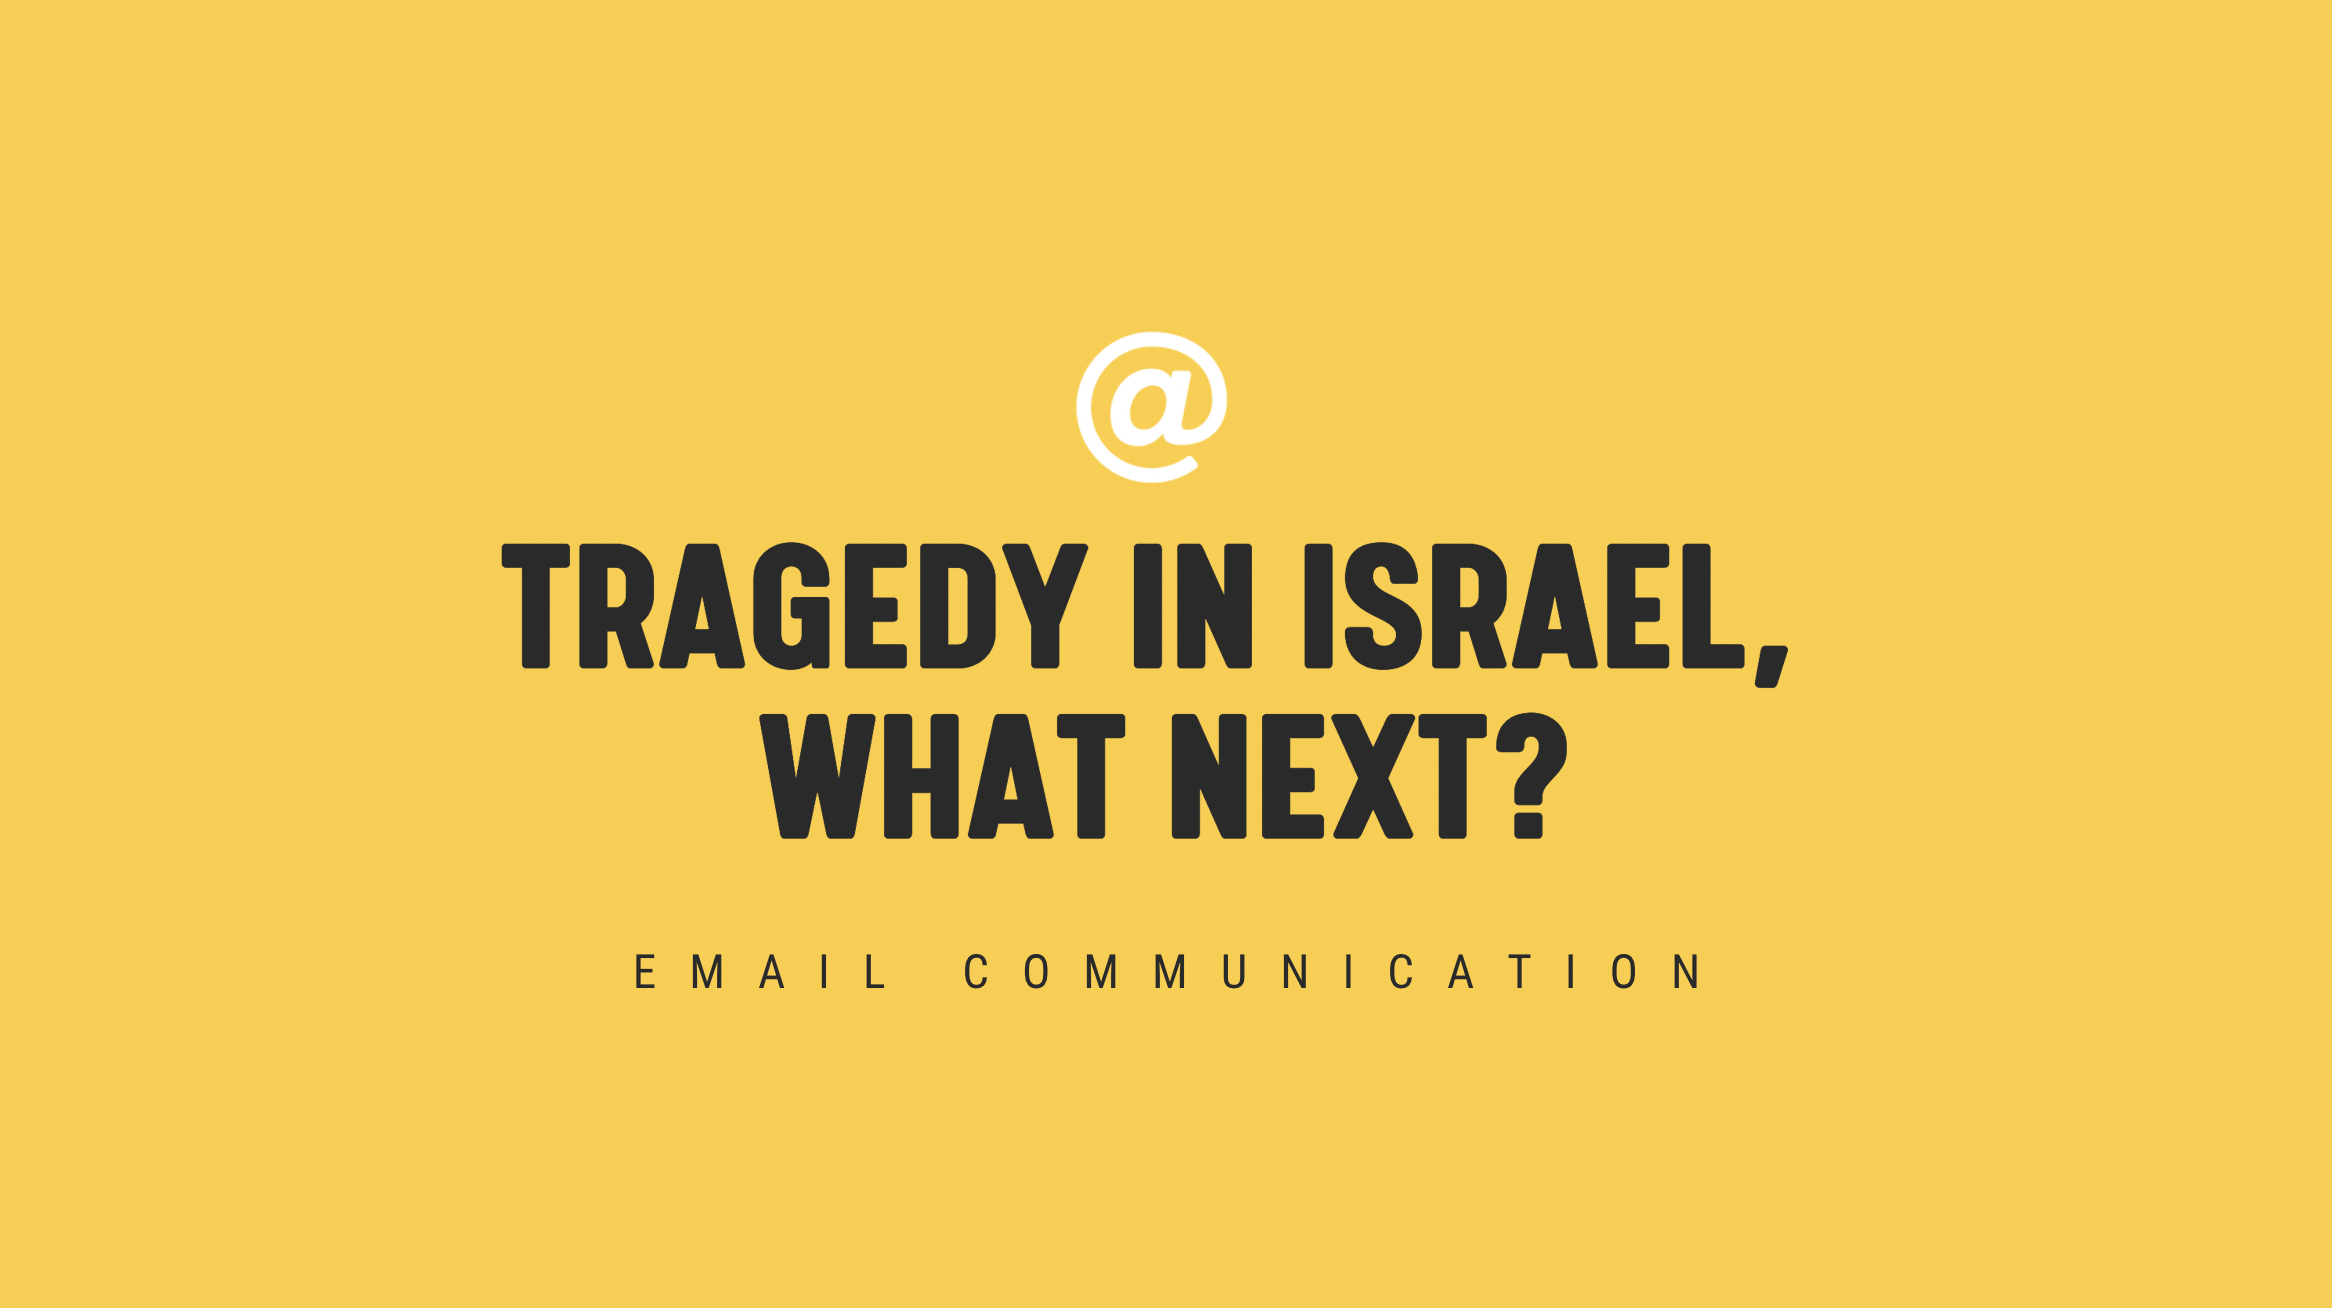 [NEW] Tragedy in Israel, What Next? - Timely Email